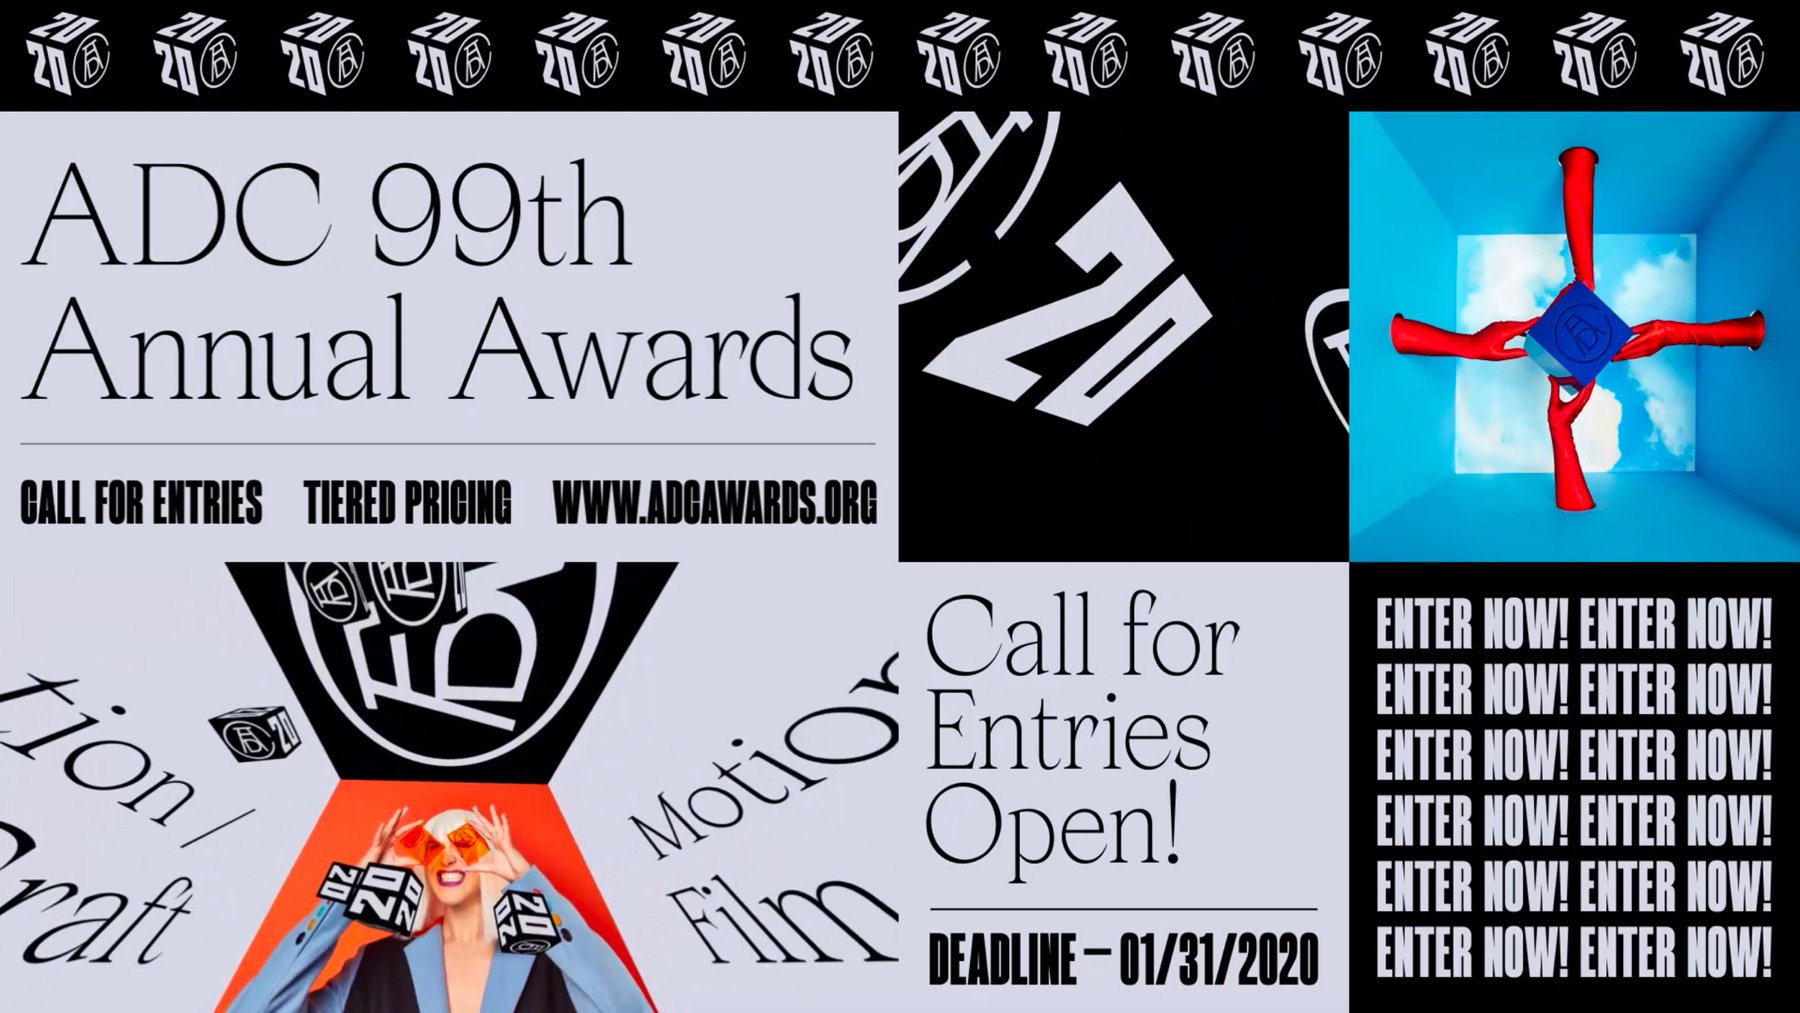 ADC 99th Annual Awards call for entries — oneclub.org